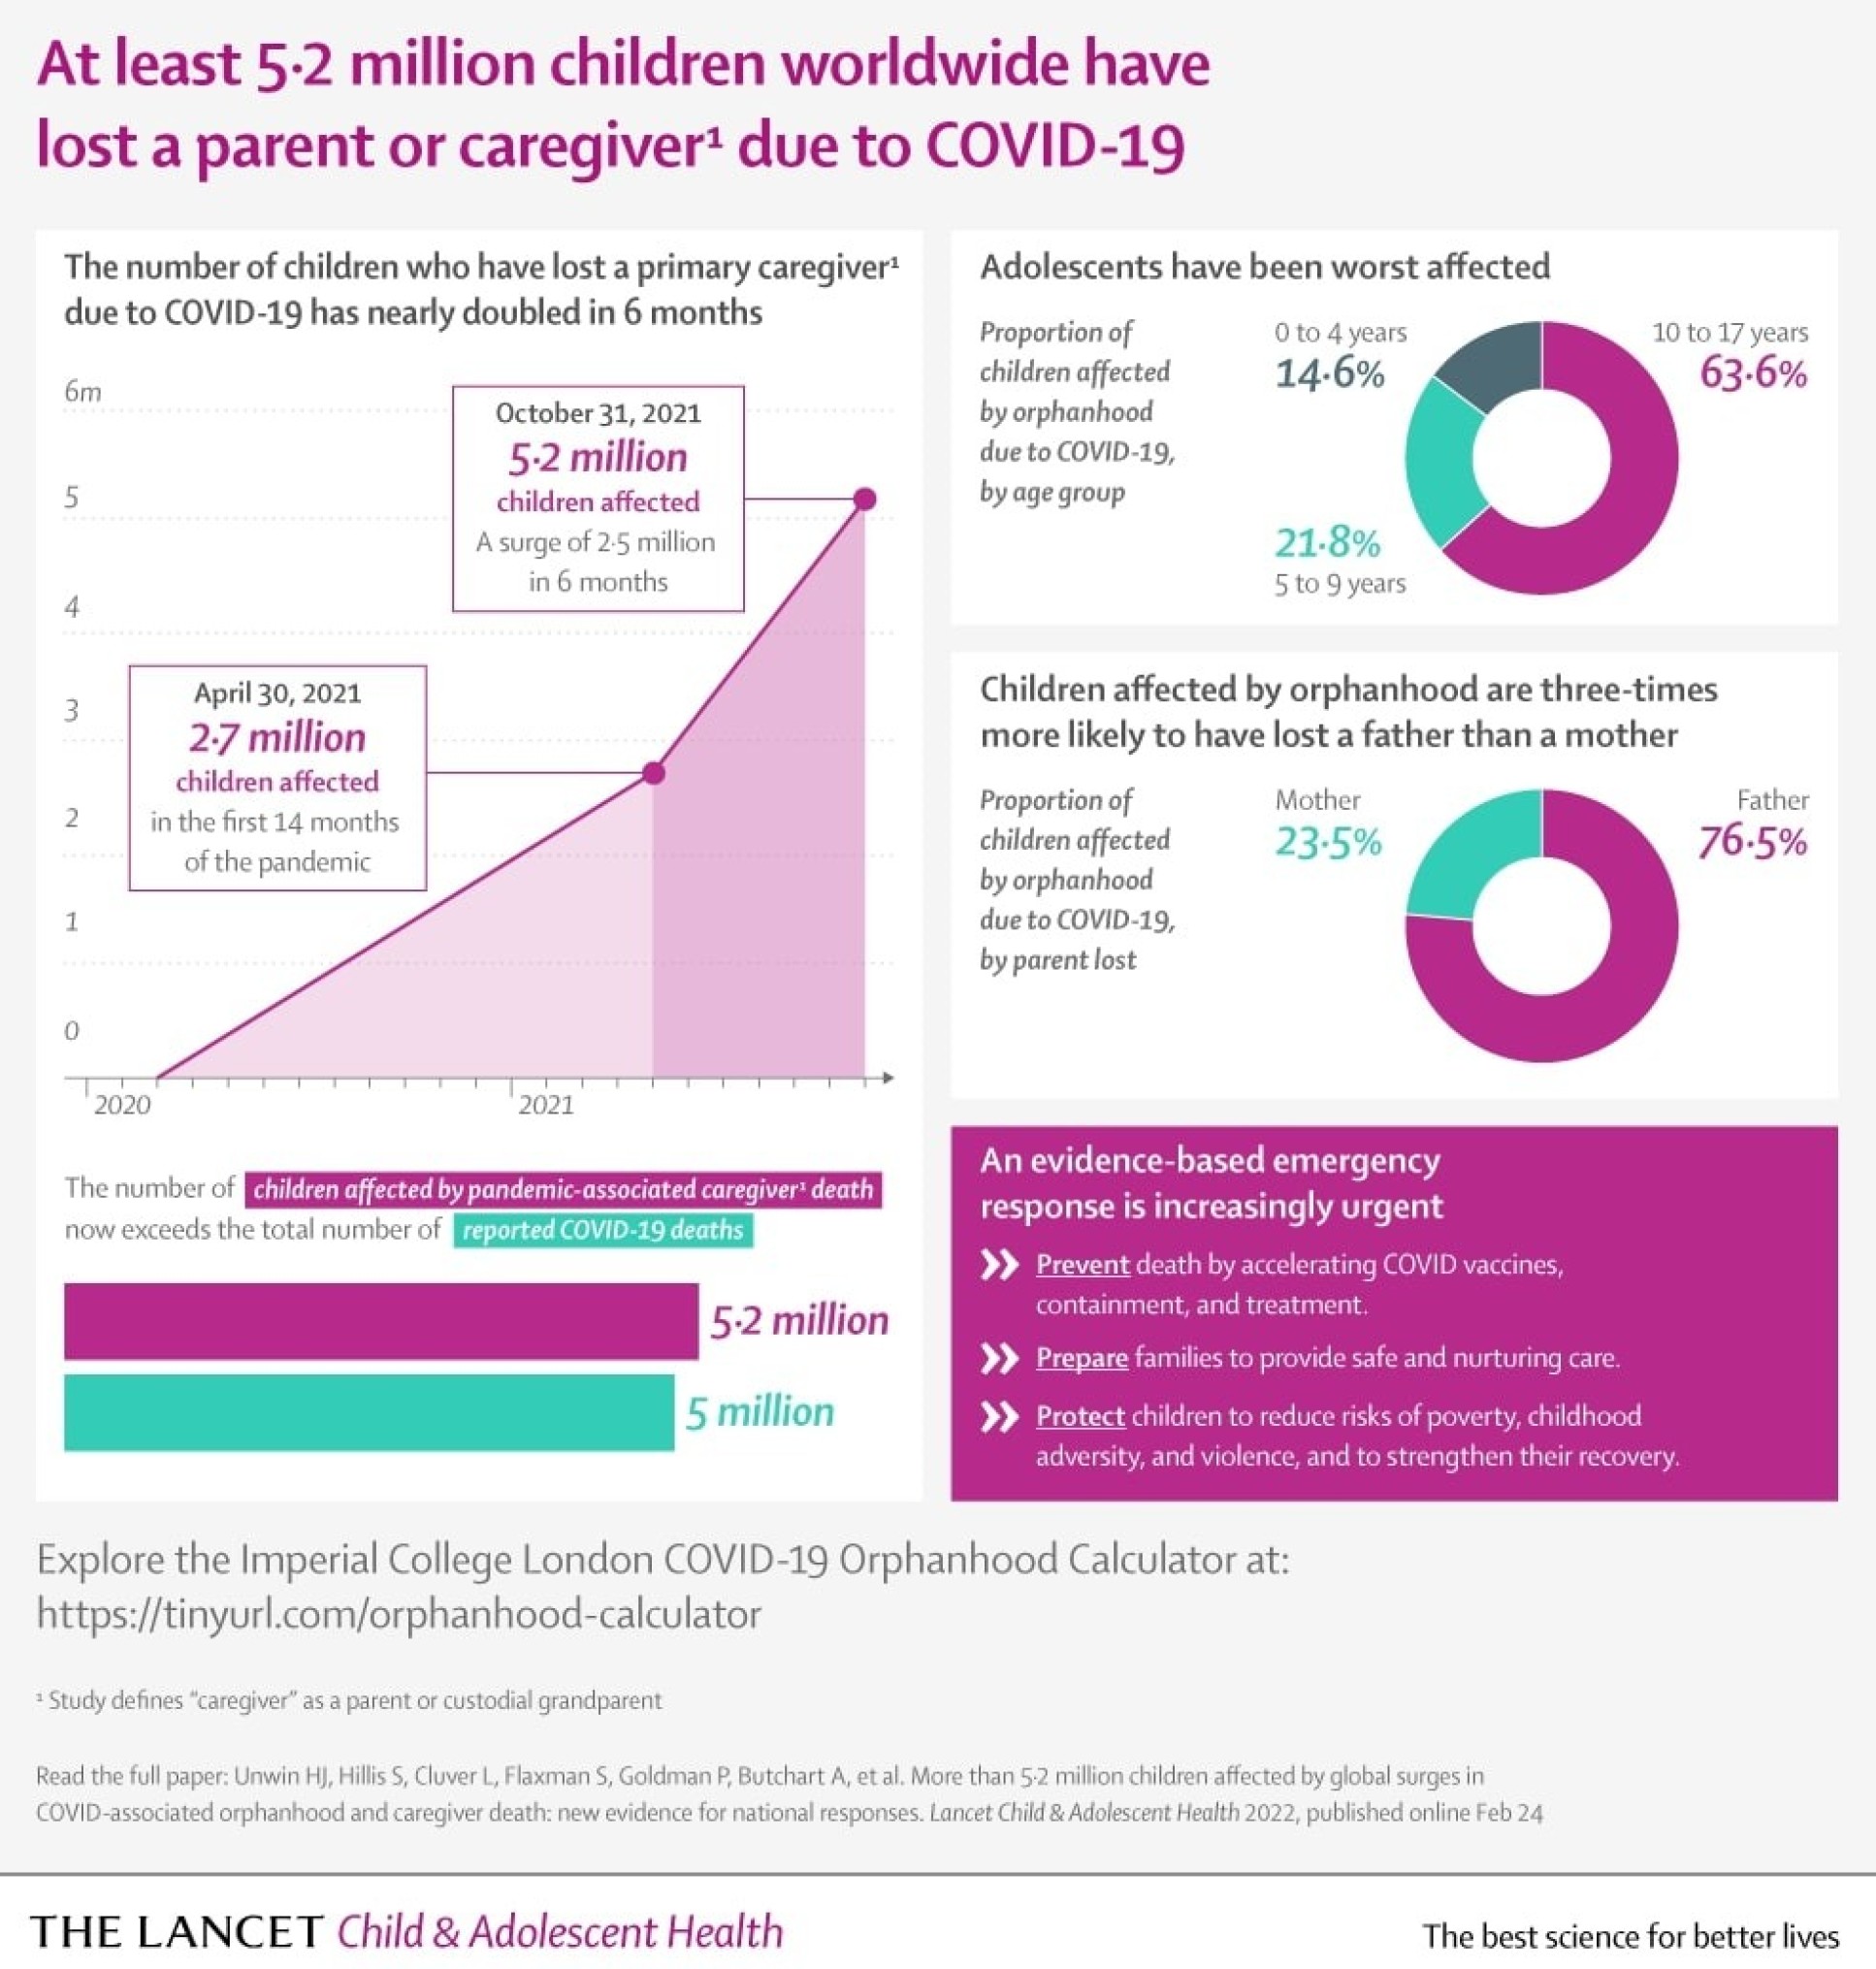 An infographic showing the results of a study into orphanhood from COVID-19